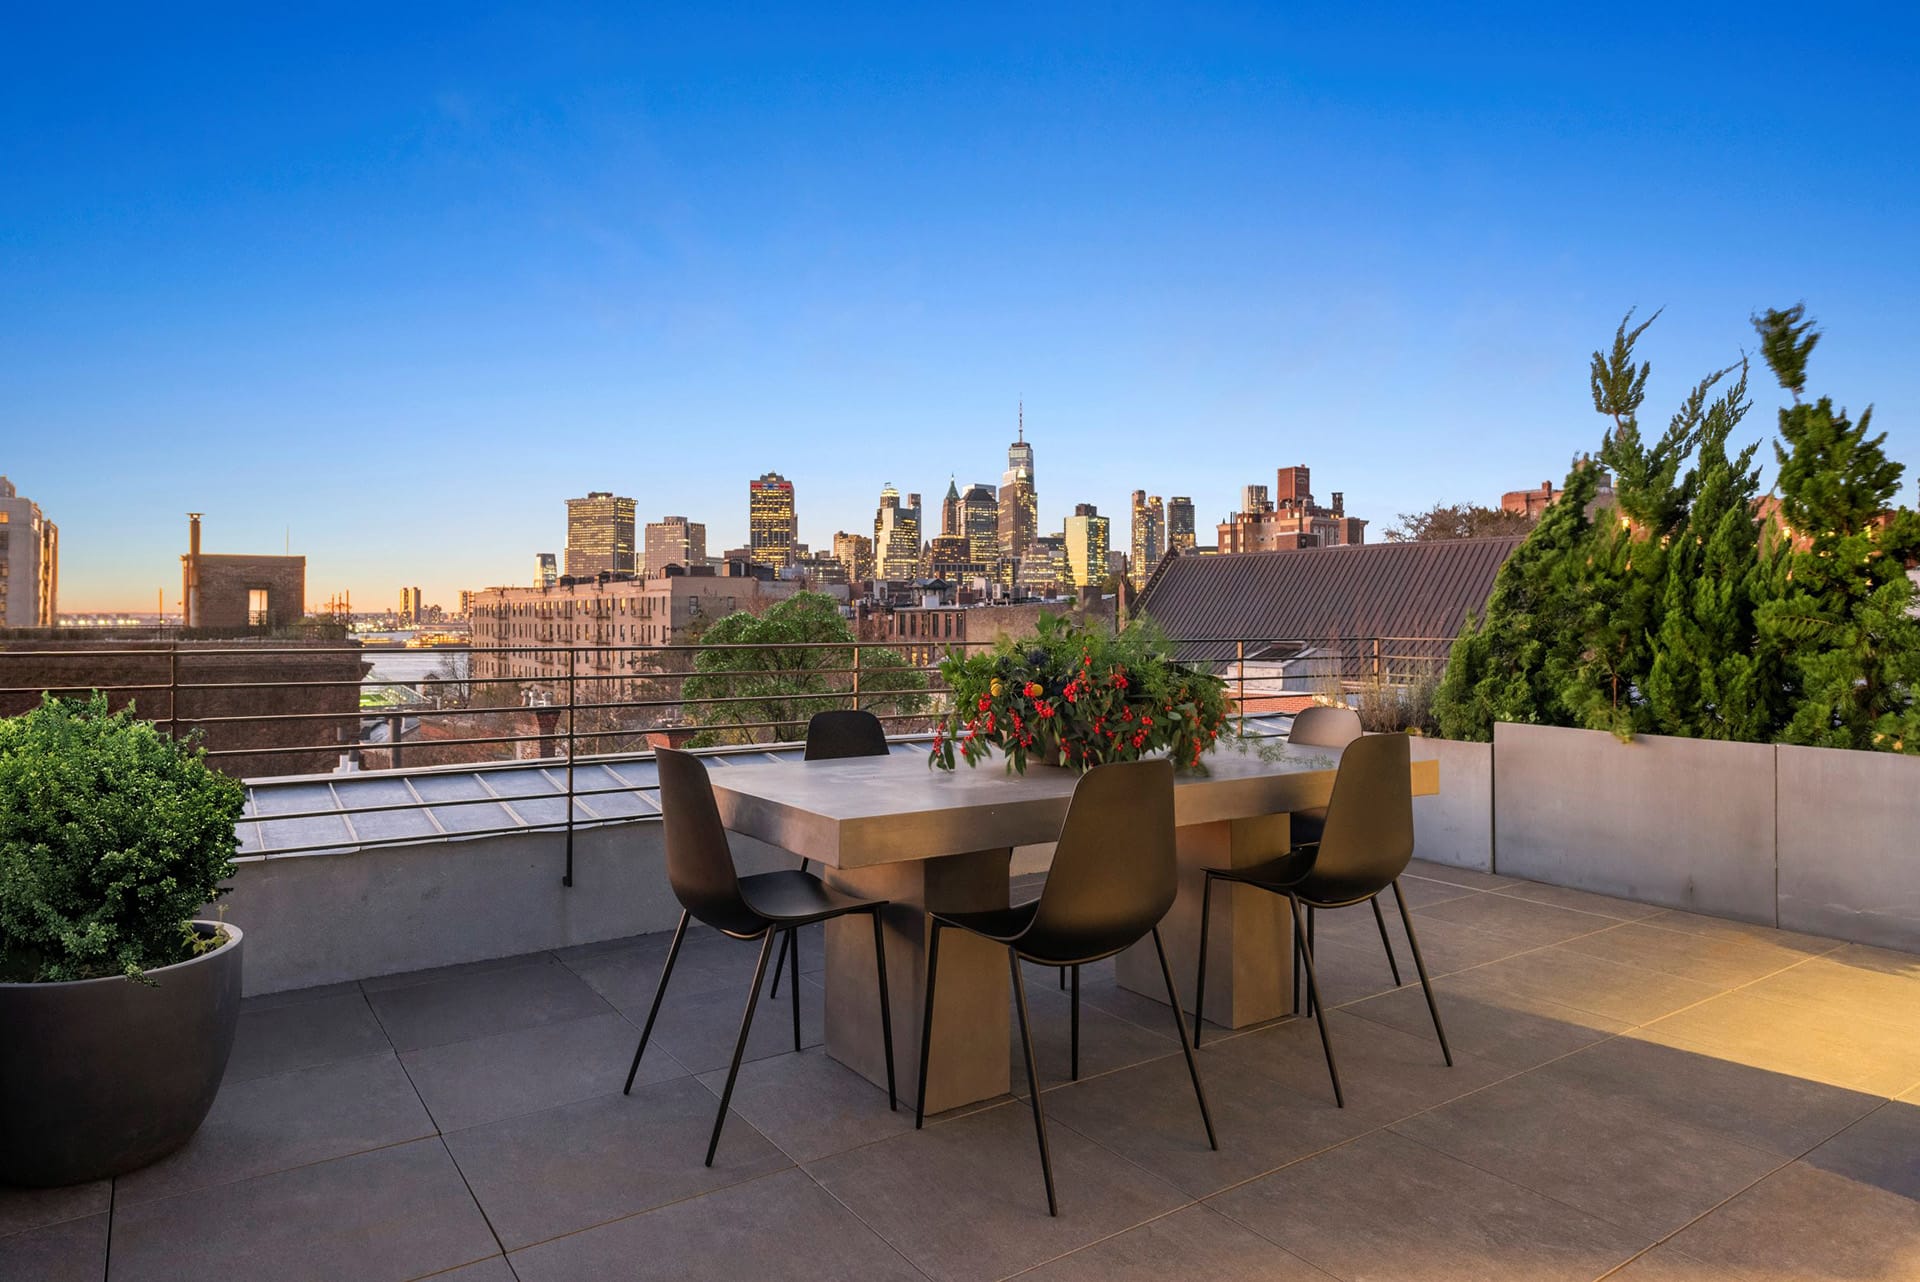 Rooftop with bluestone pavers, a dining table and chairs, lush evergreen landscaping, and sweeping views of the Manhattan skyline.